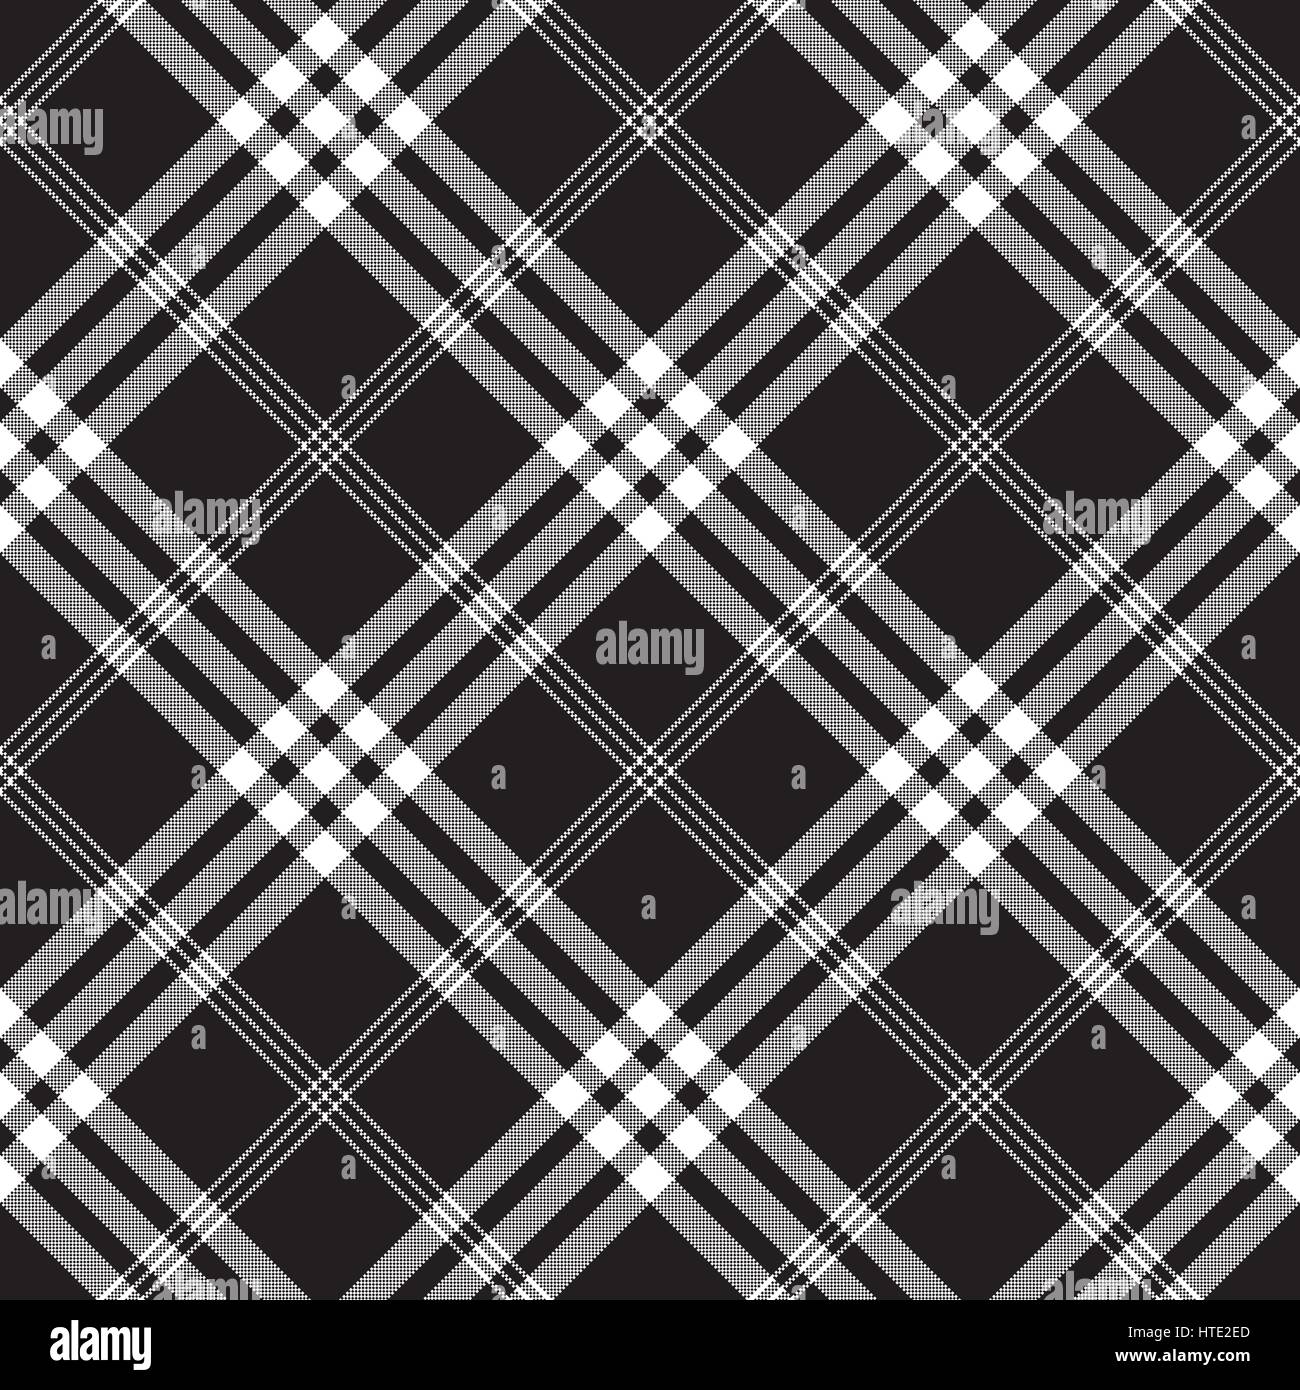 Black and white check pixel square fabric texture seamless pattern. Vector illustration. Stock Vector